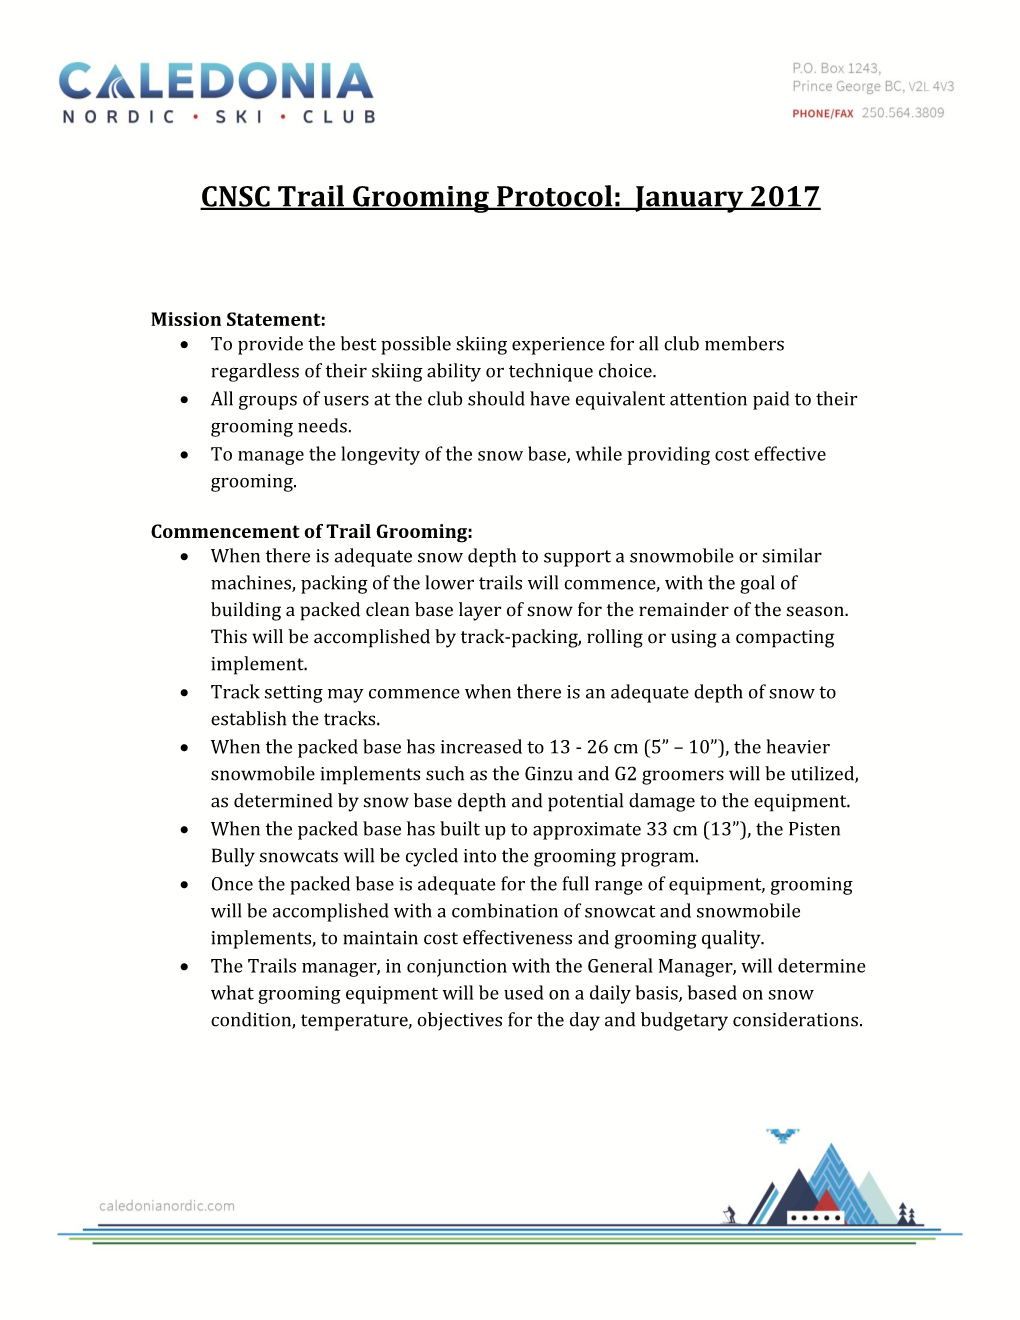 CNSC Trail Grooming Protocol: January 2017